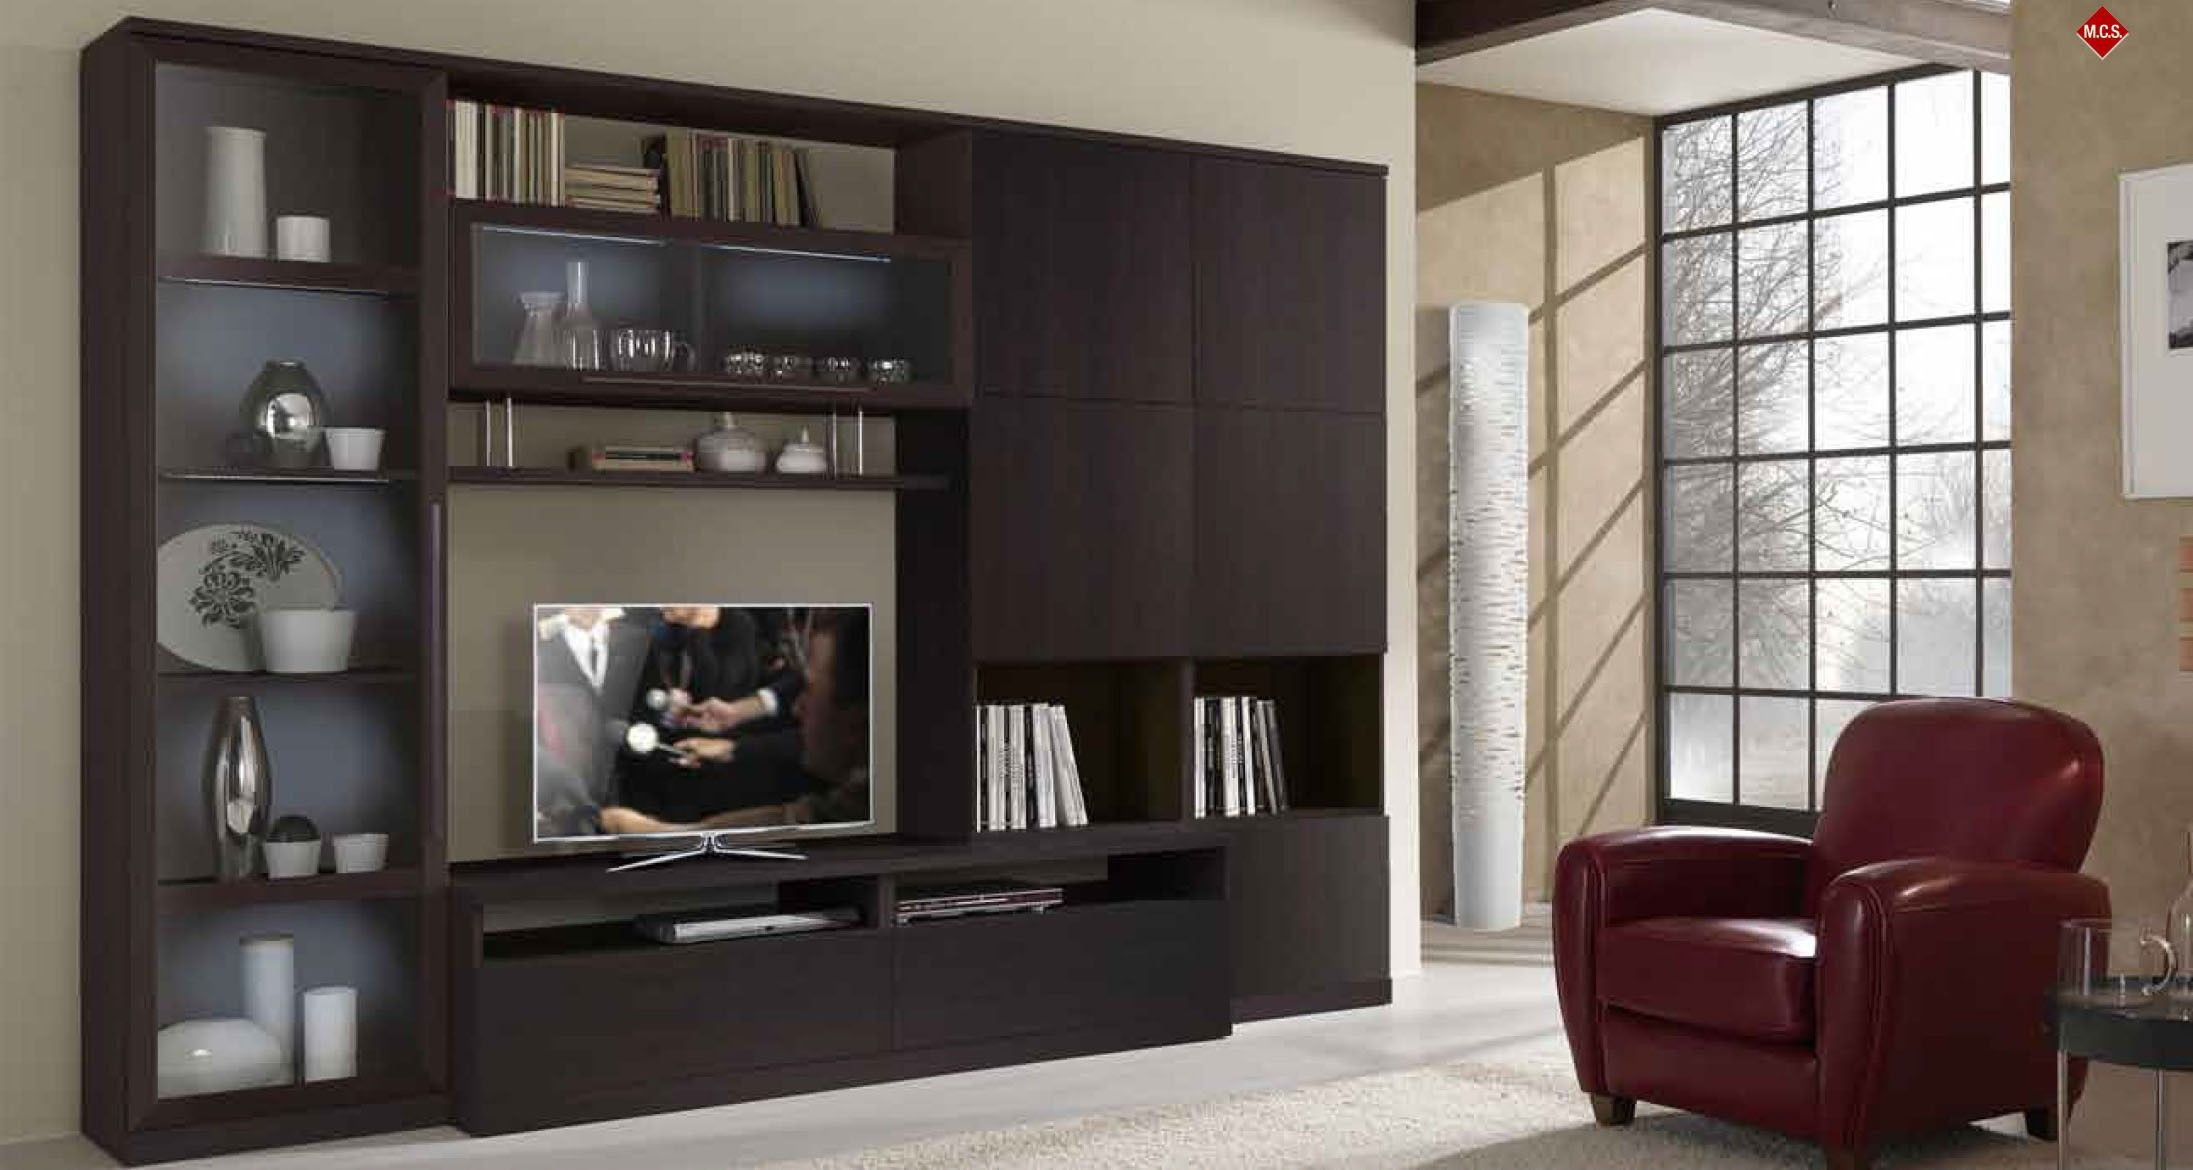 Wall Cabinet Design Living Room
 Home Built In Bar and wall unit ideas